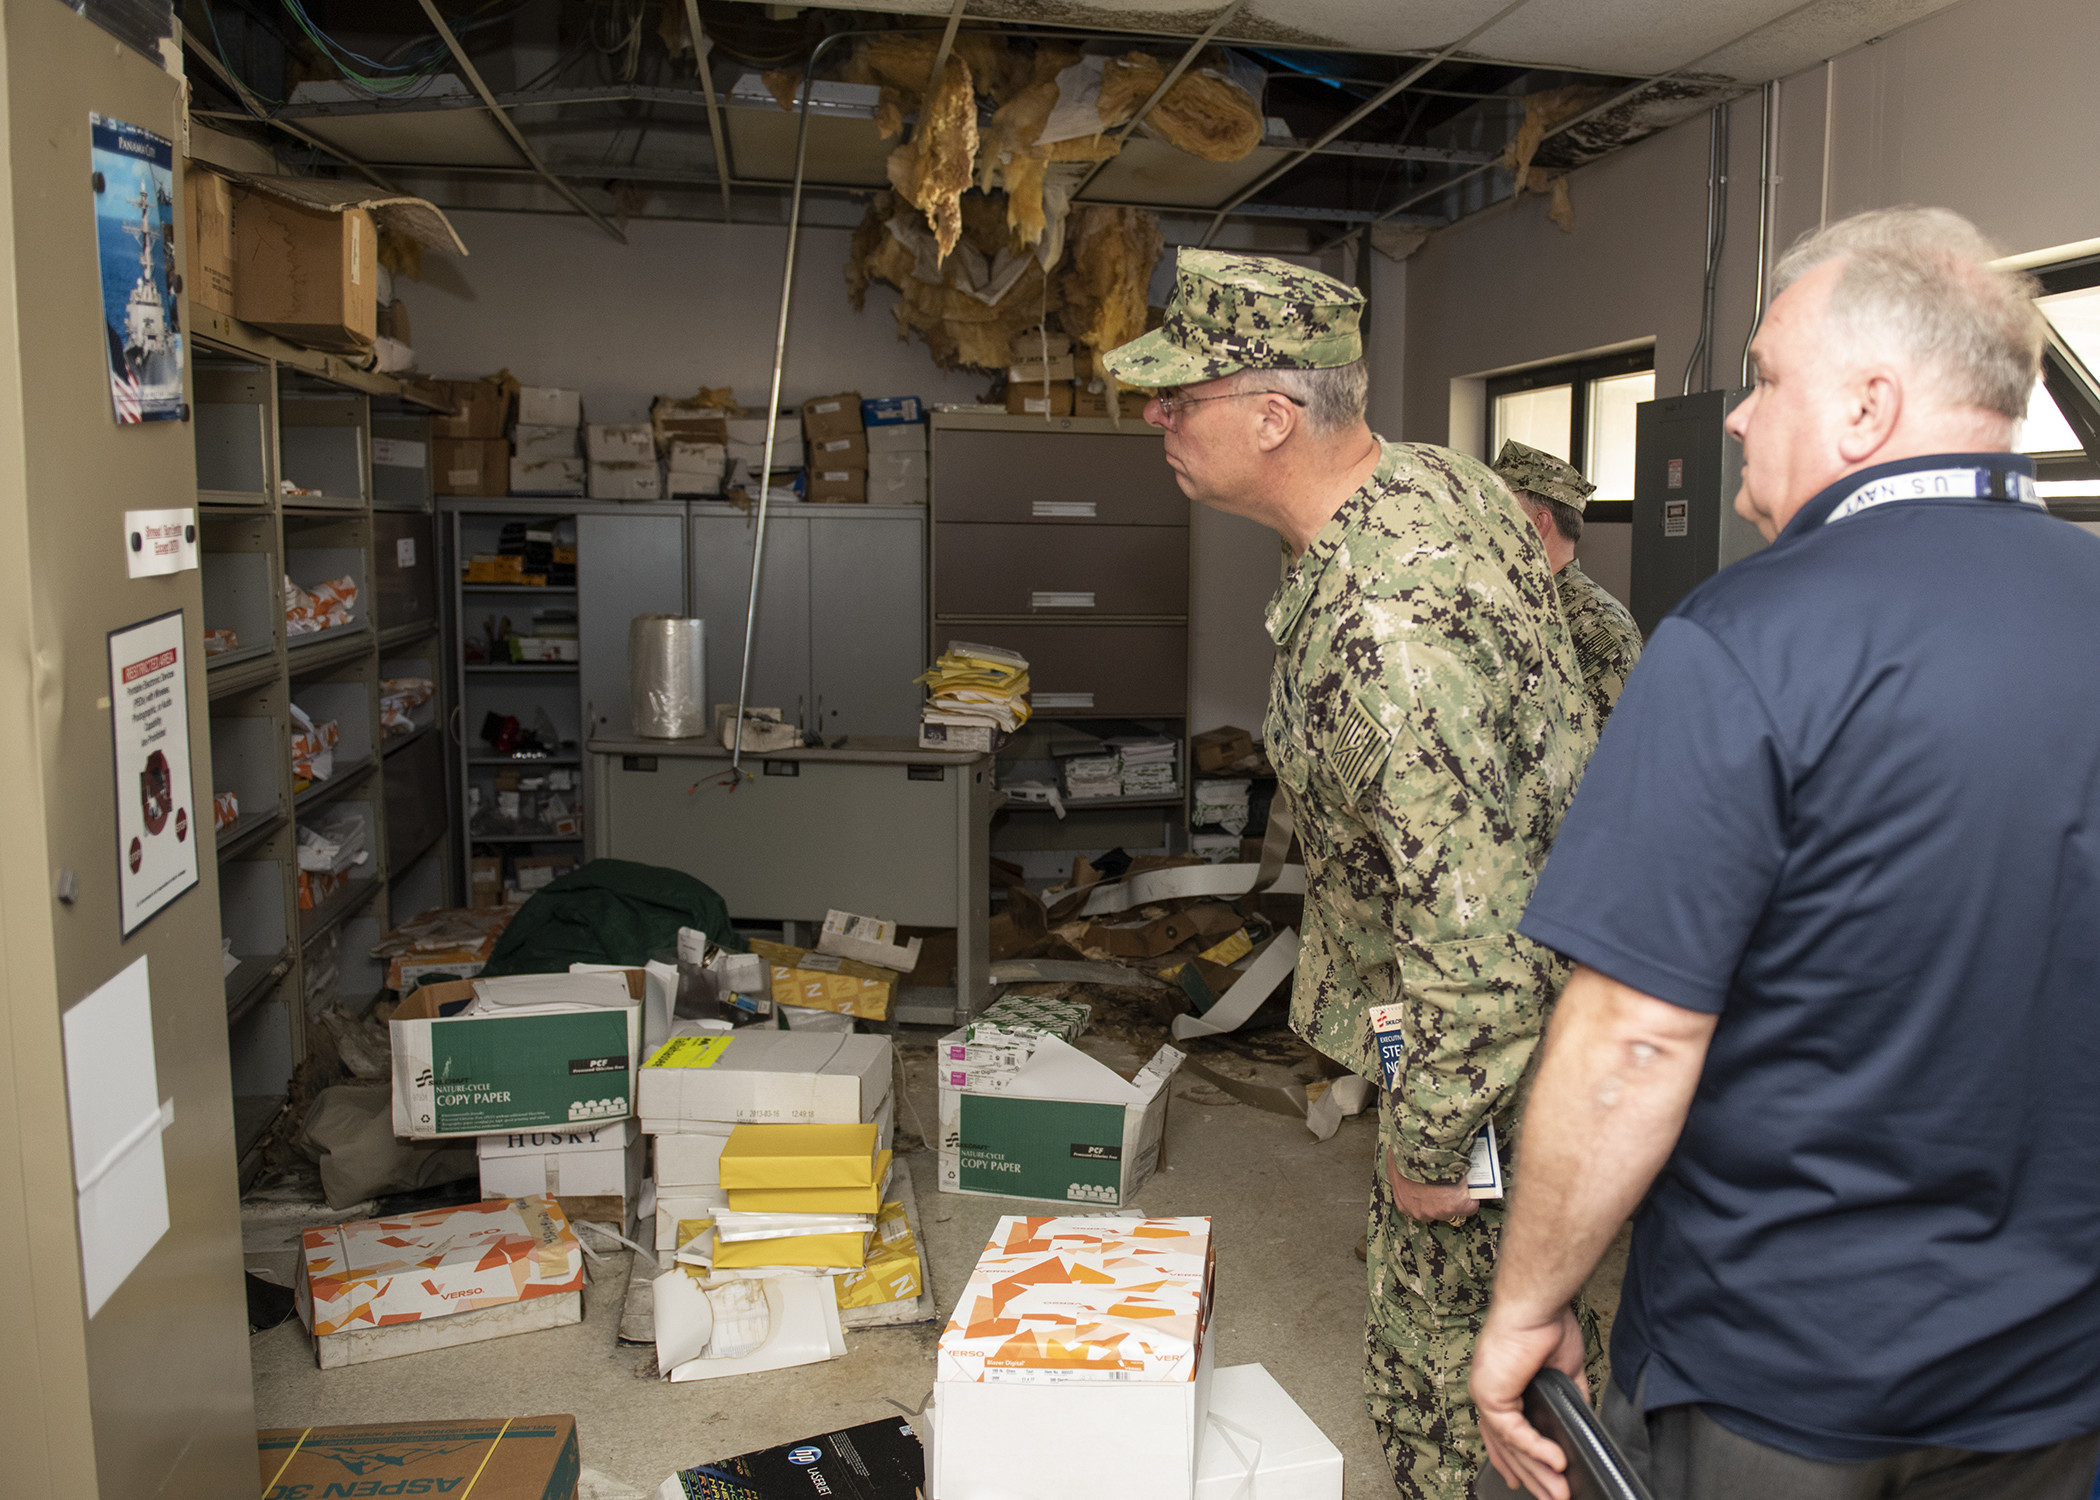 plan Overfrakke Nervesammenbrud NSWC PCD slated to receive $110.2 million for Hurricane Michael repairs >  Naval Sea Systems Command > Saved News Module